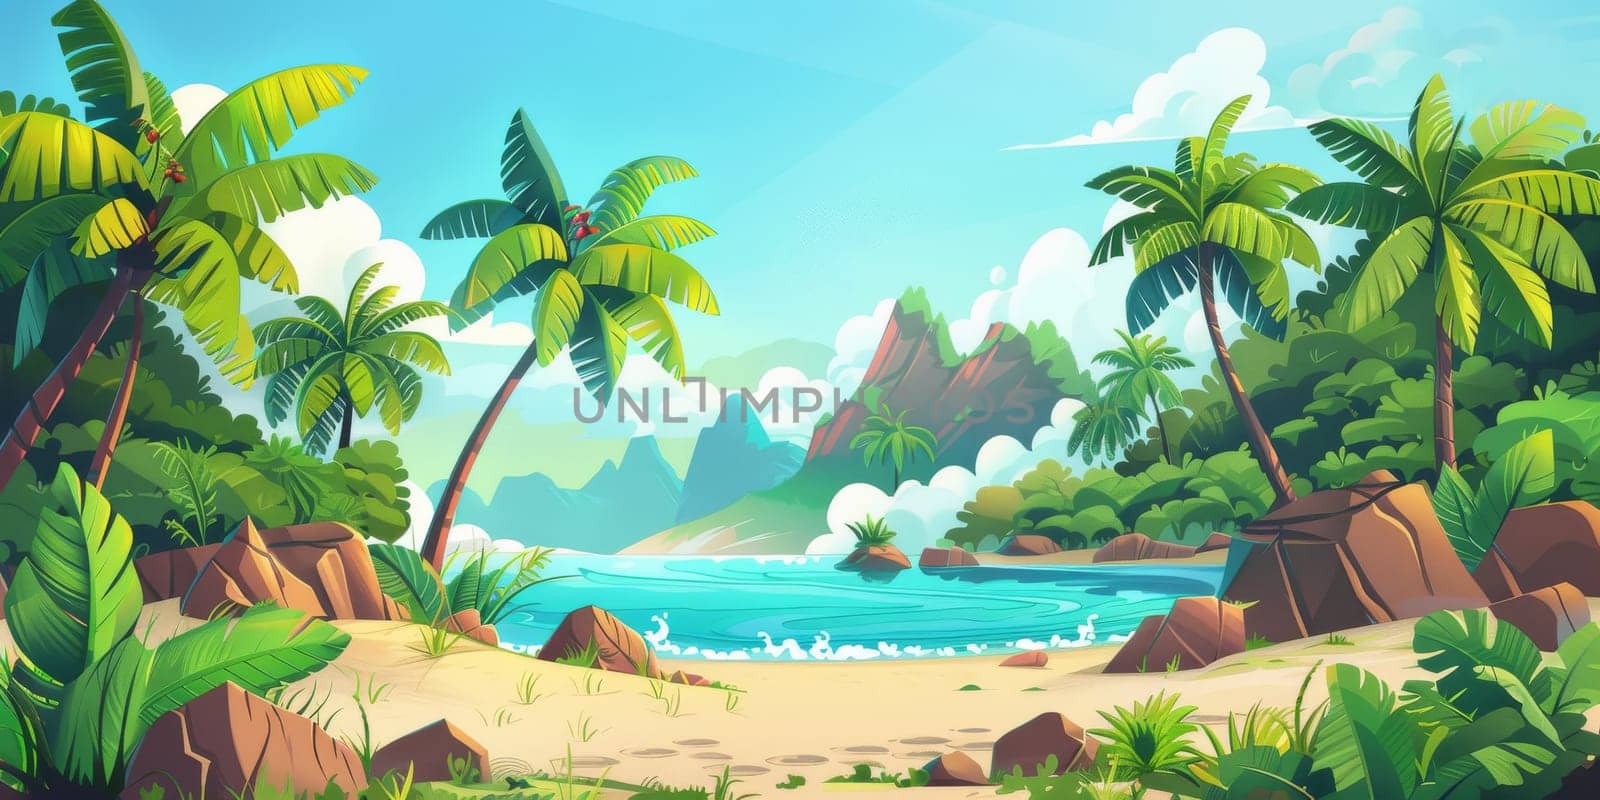 Vibrant painting featuring a tropical beach with palm trees under clear sky